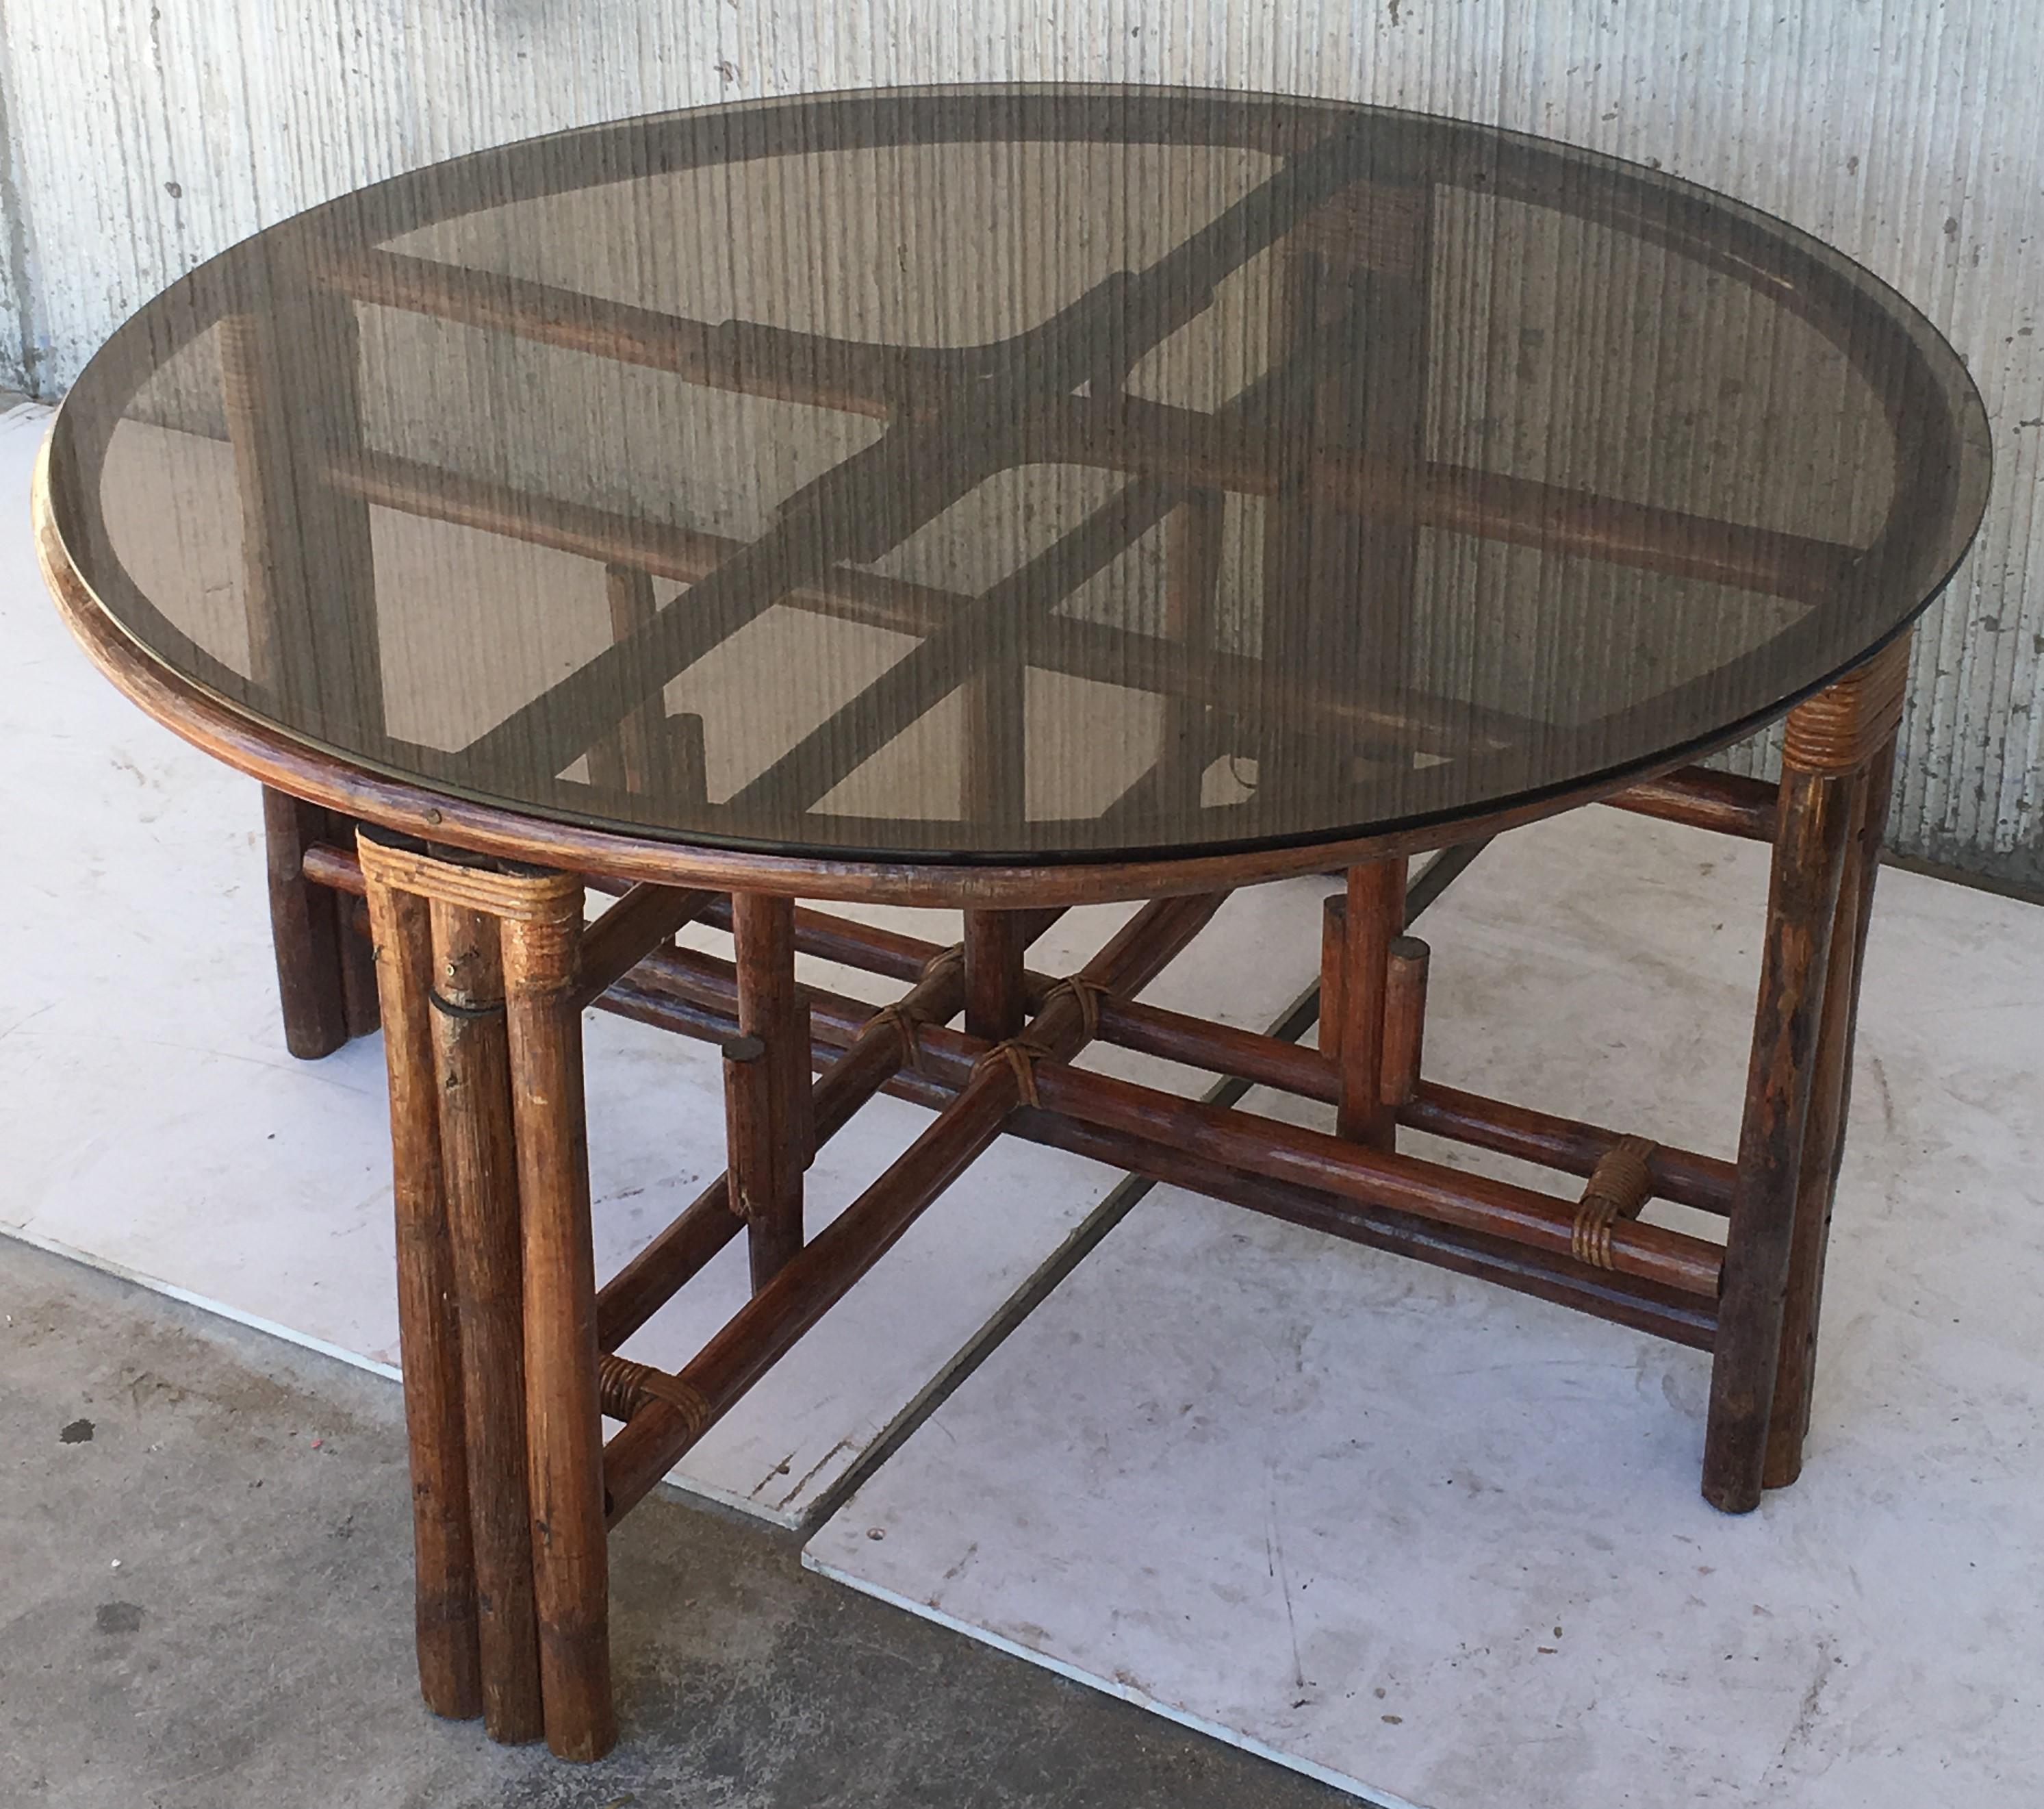 Vintage Round McGuire Style Bamboo and Glass Dining Table with Four Stools 1